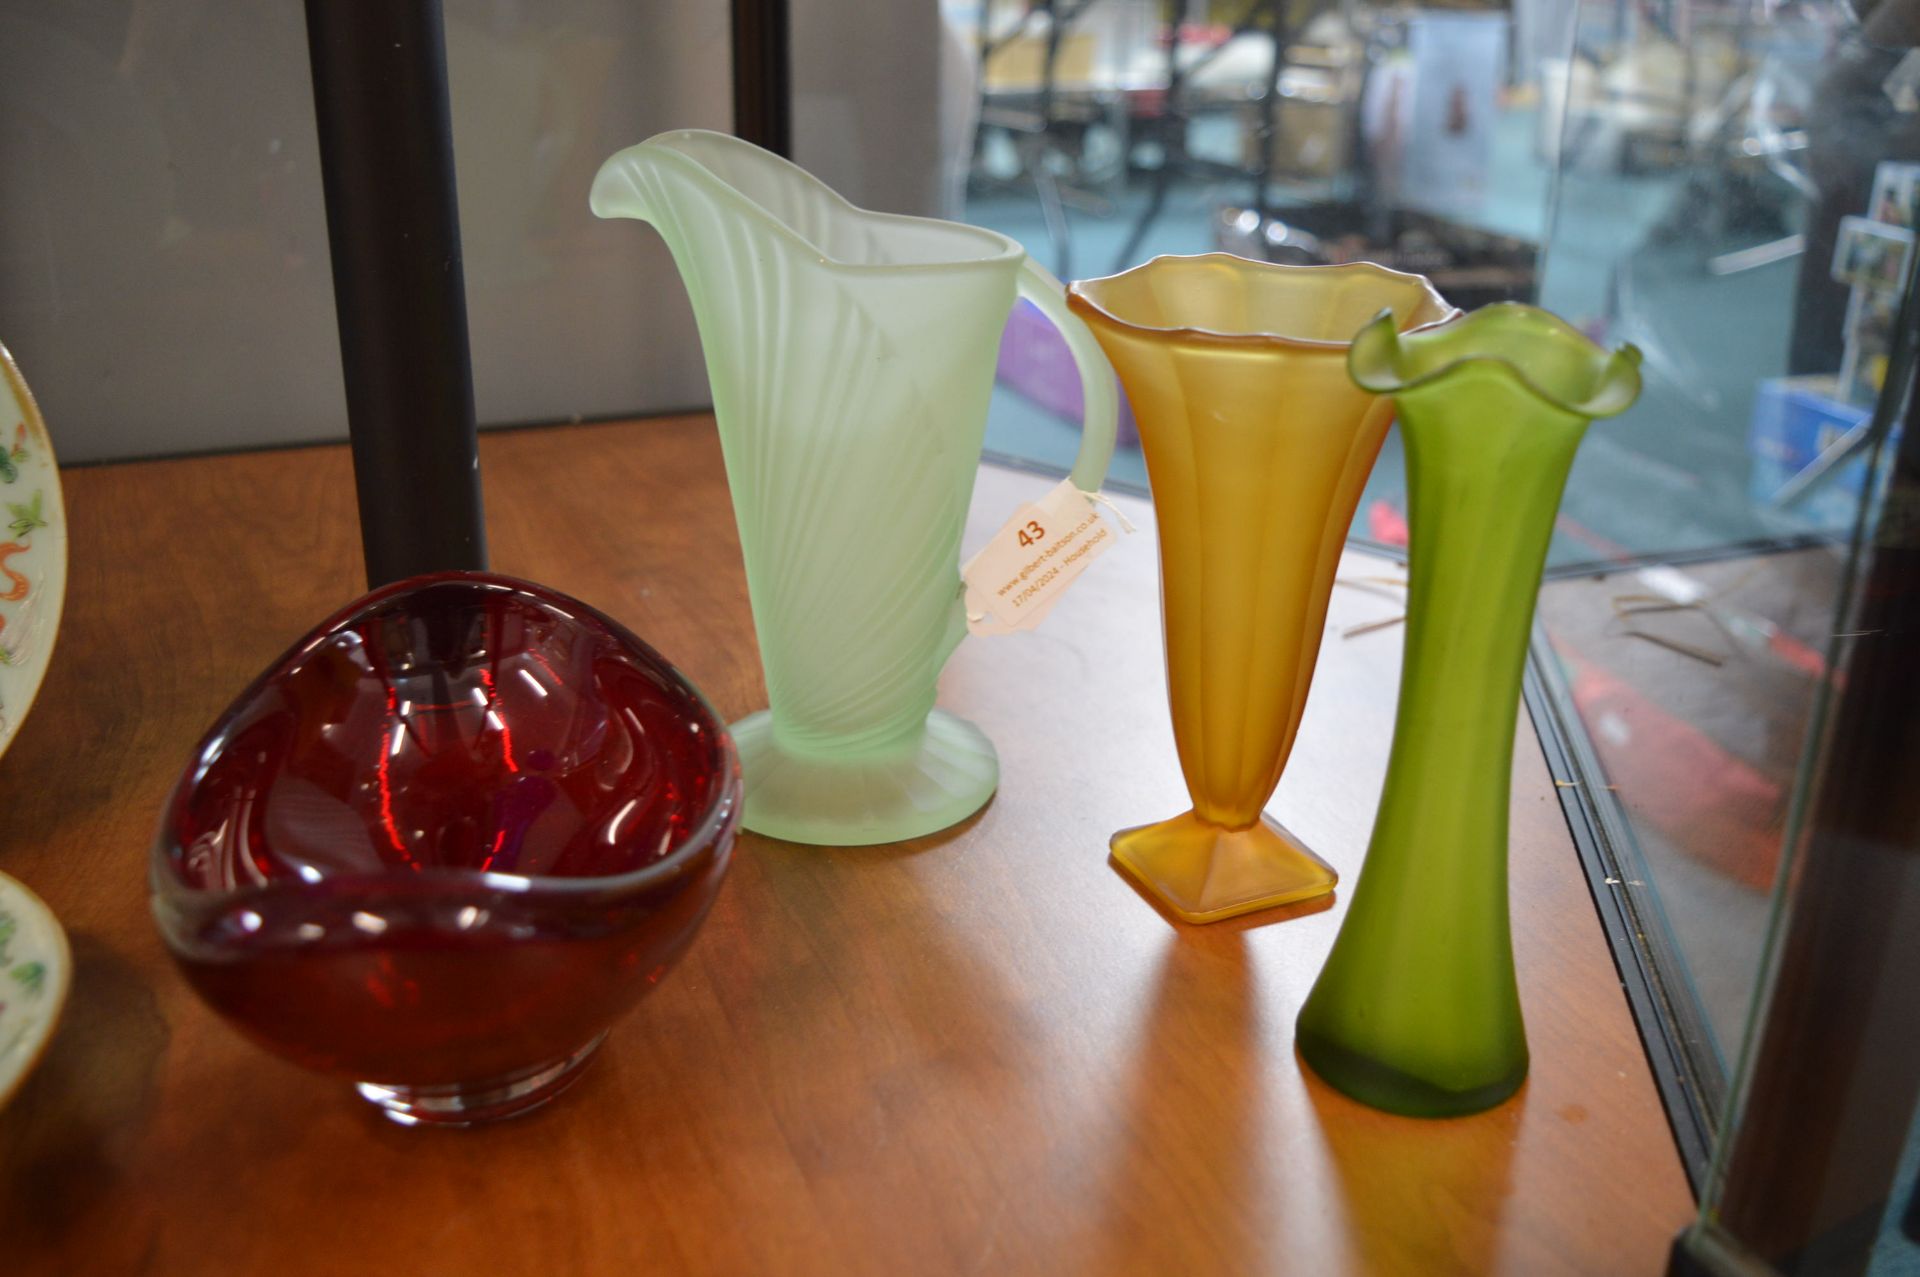 Coloured Glass Vases and a Bowl